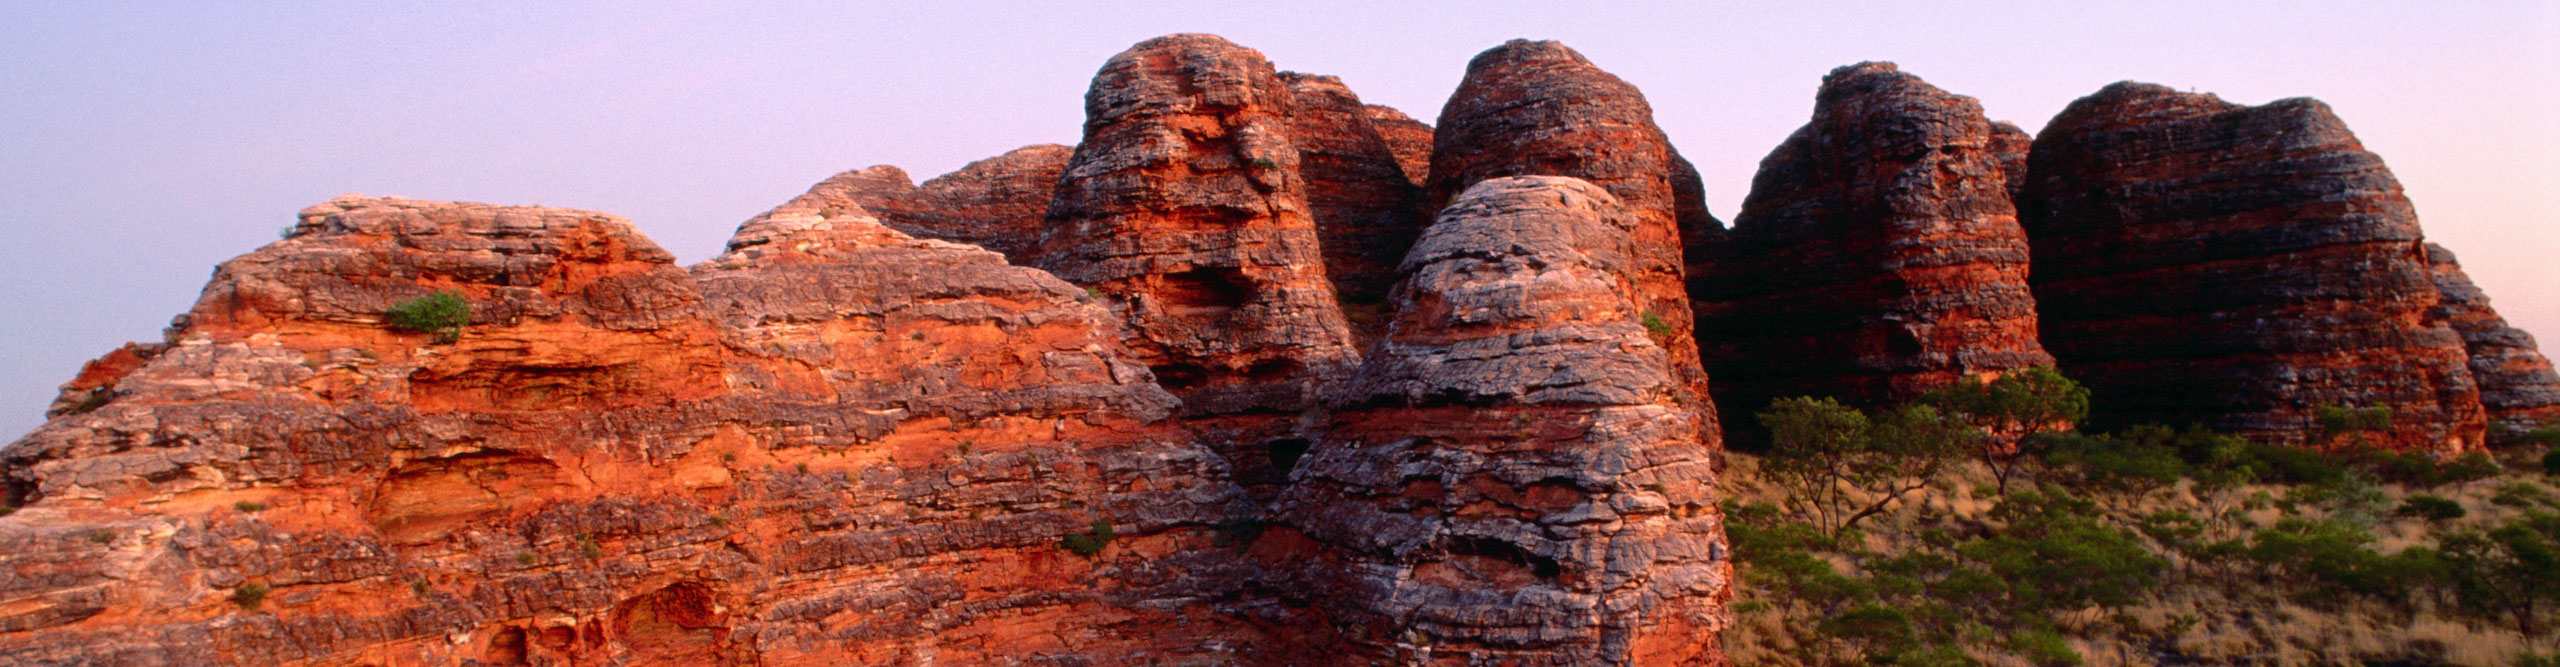 Sunset at the bungle bungles, turning the rocks a deep red colour, Western Australia